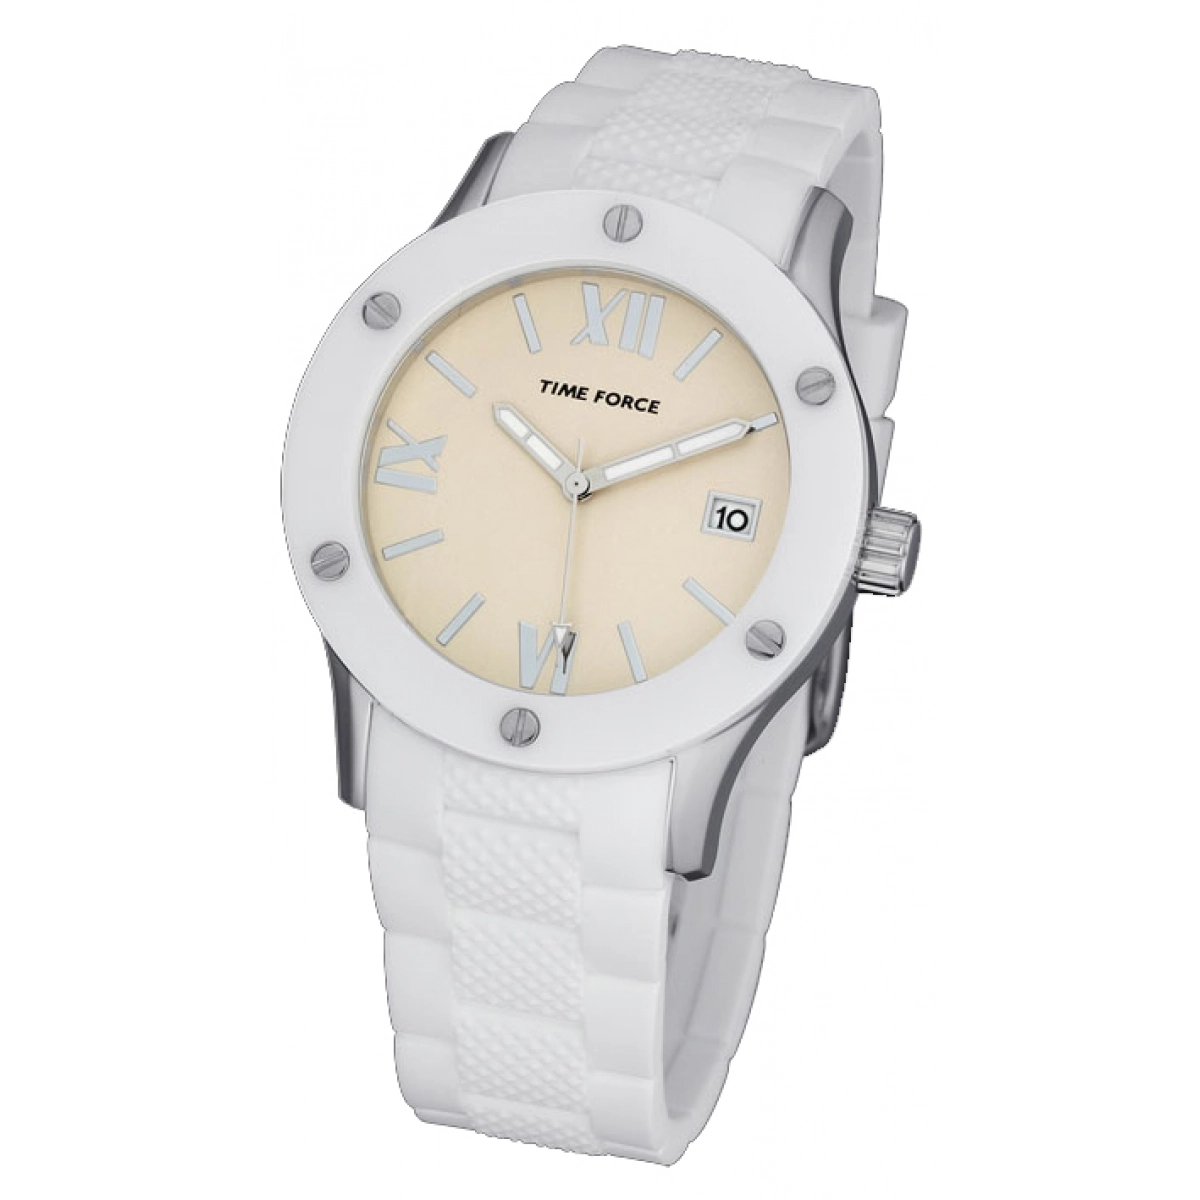 ANALOGUE WATCH FOR WOMAN TIME FORCE TF4138L02